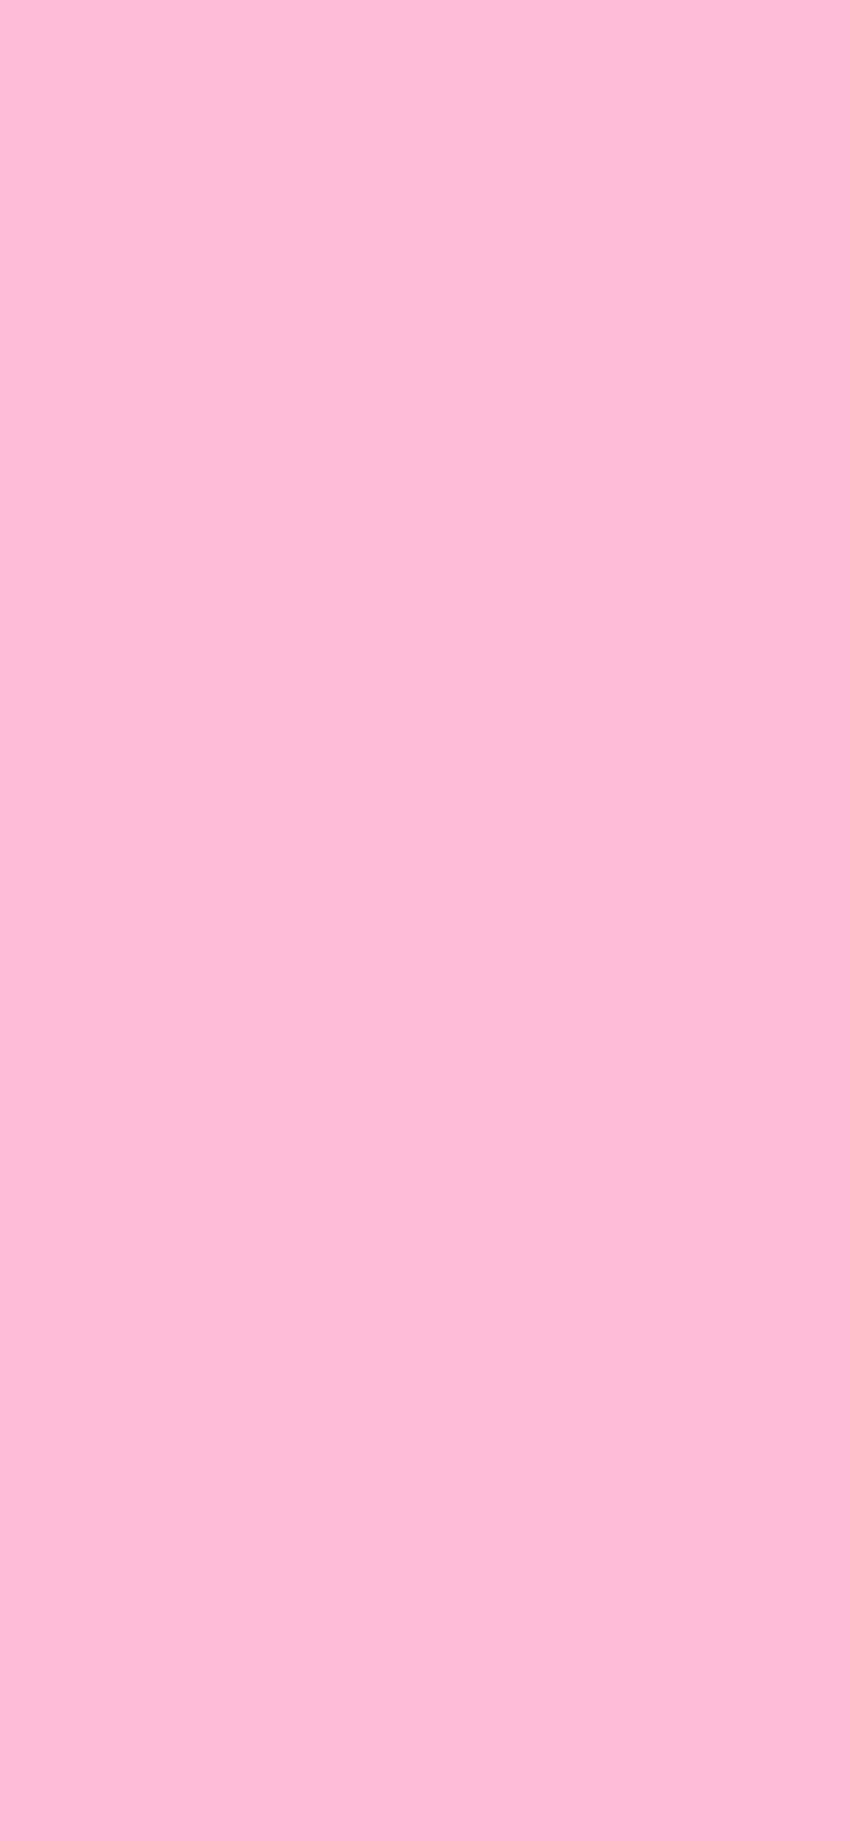 Cotton Candy Solid Color Background HD phone wallpaper